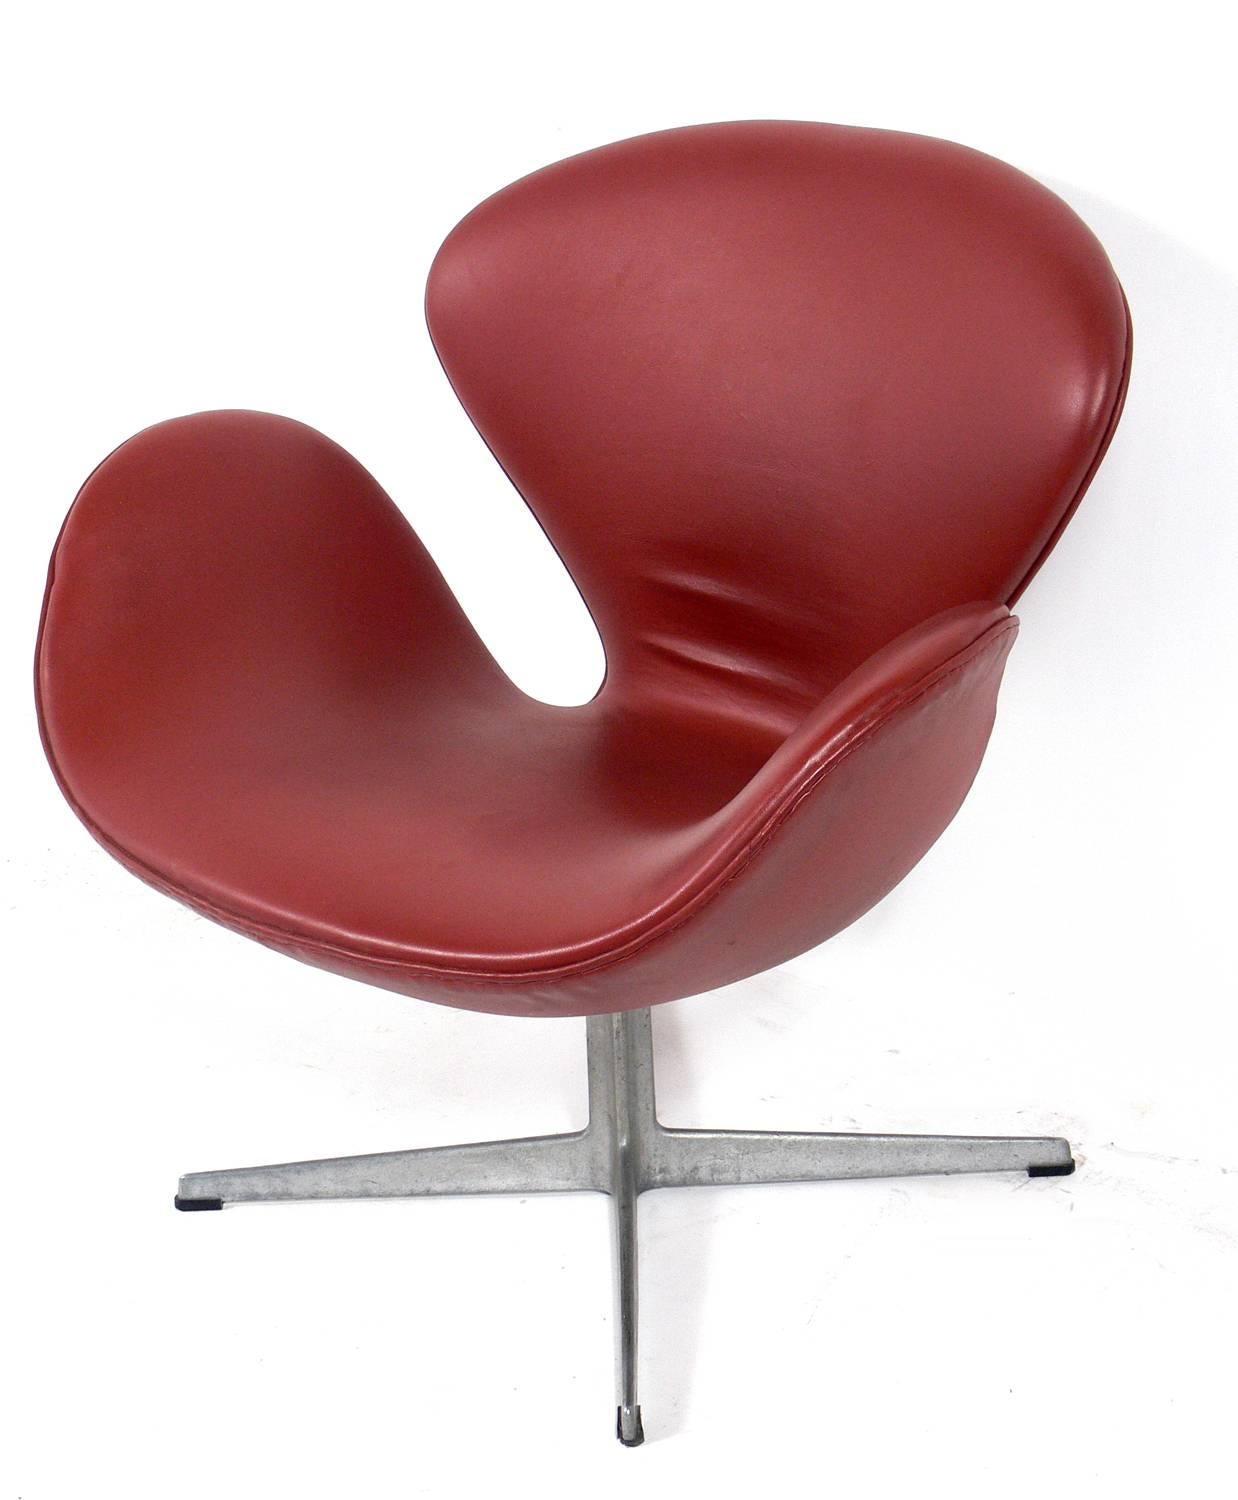 Sculptural swan chair, designed by Arne Jacobsen for Fritz Hansen, Denmark, circa 1960s. It retains it's original cognac color vinyl upholstery. Super low maintenance and easy to clean. Iconic Danish modern design.